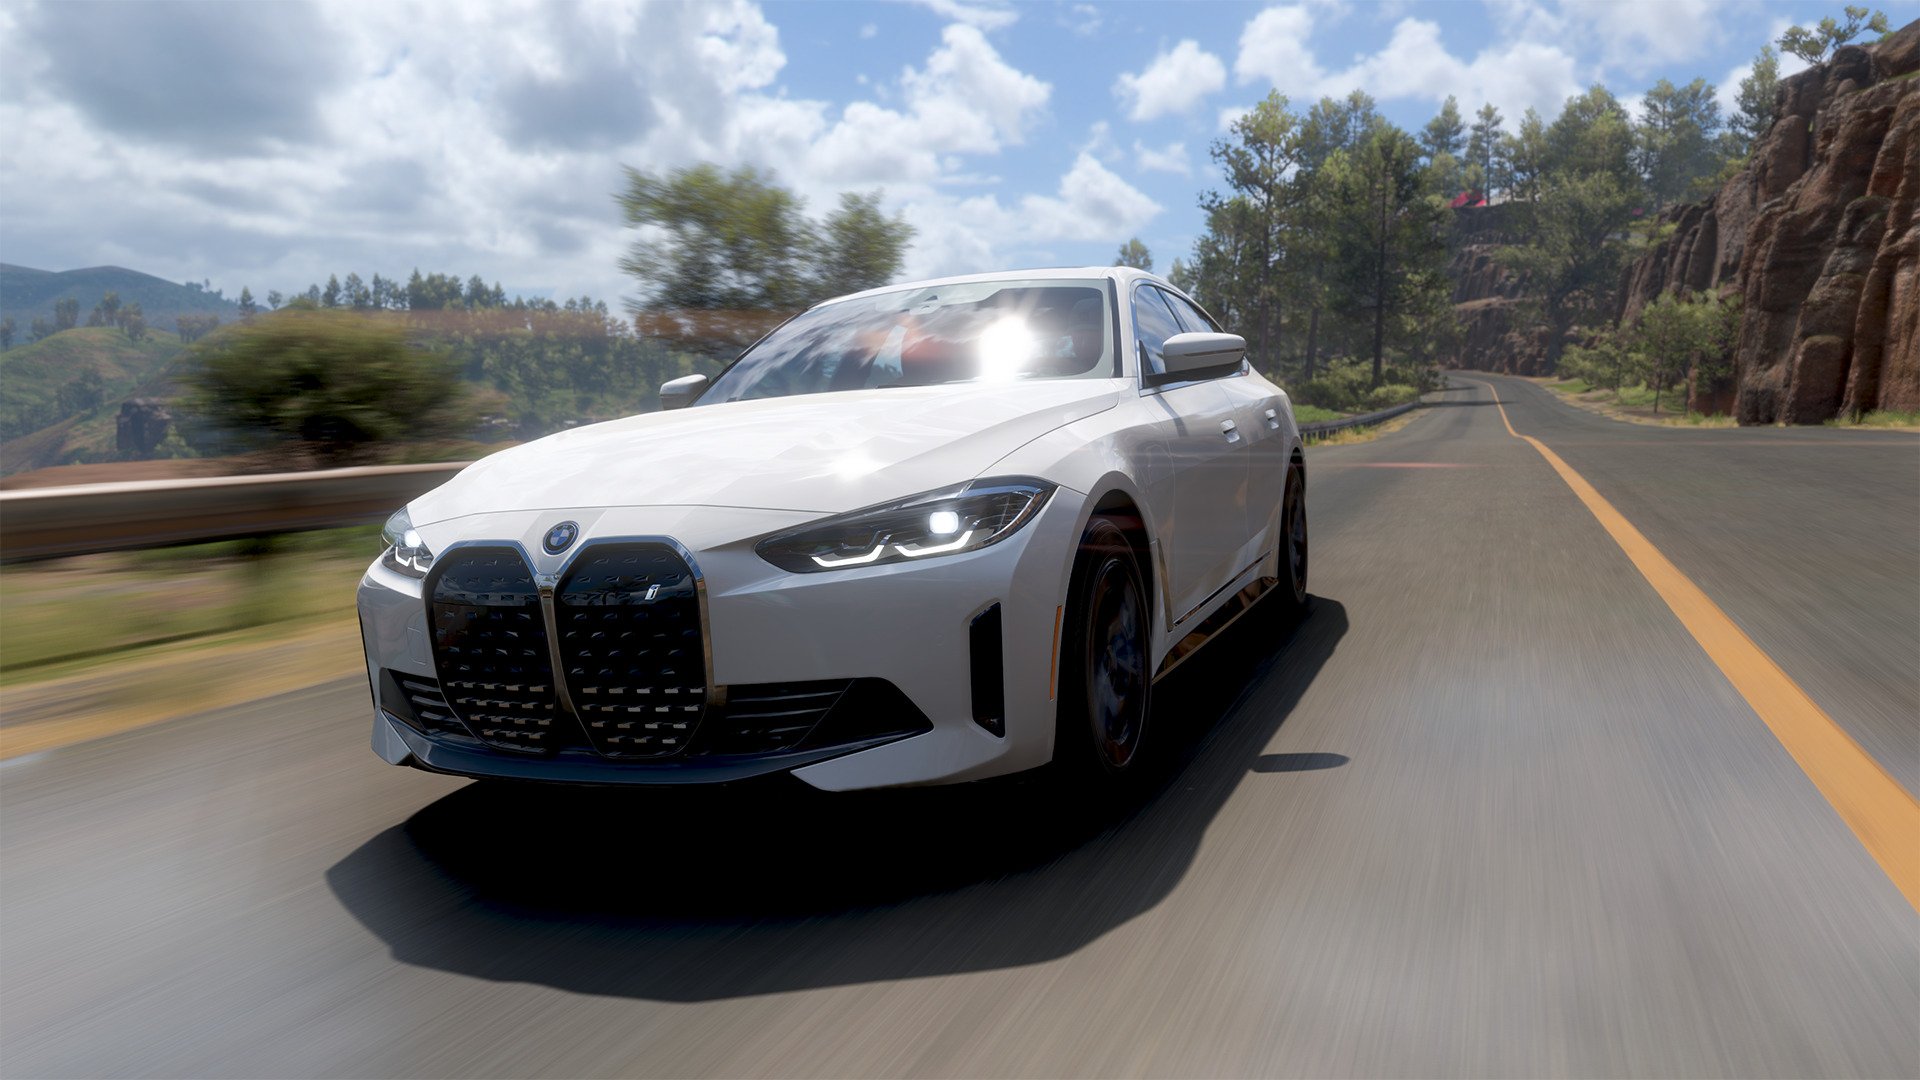 Forza Horizon 5's Latest Update Includes 5 New BMWs, 2 Rivians